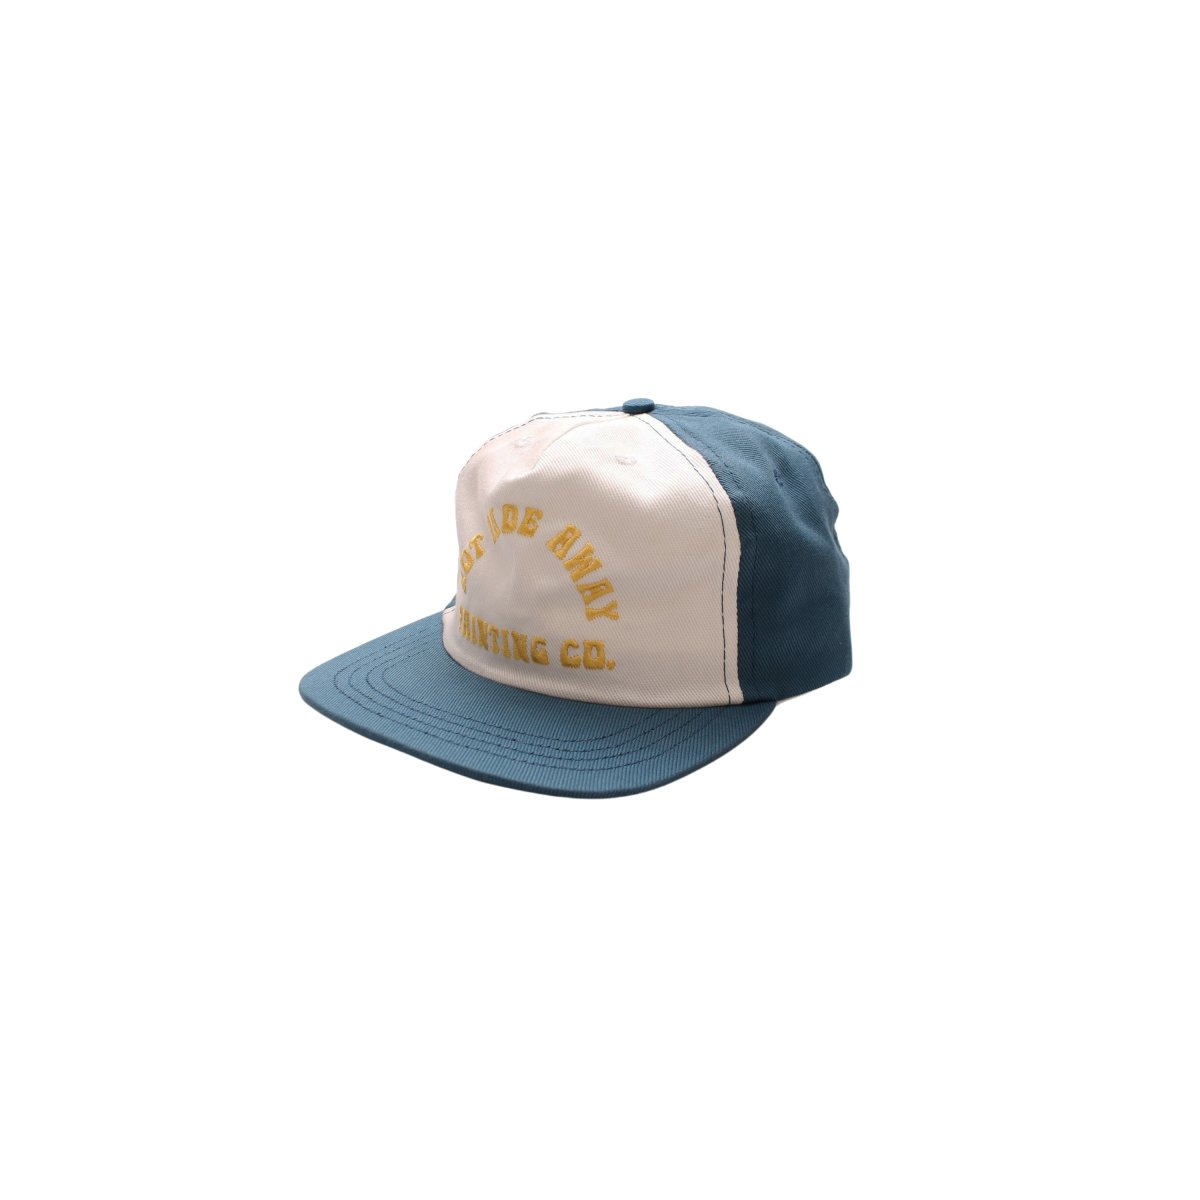 NOT FADE AWAY PAINTING CO. HAT 【BLUE】